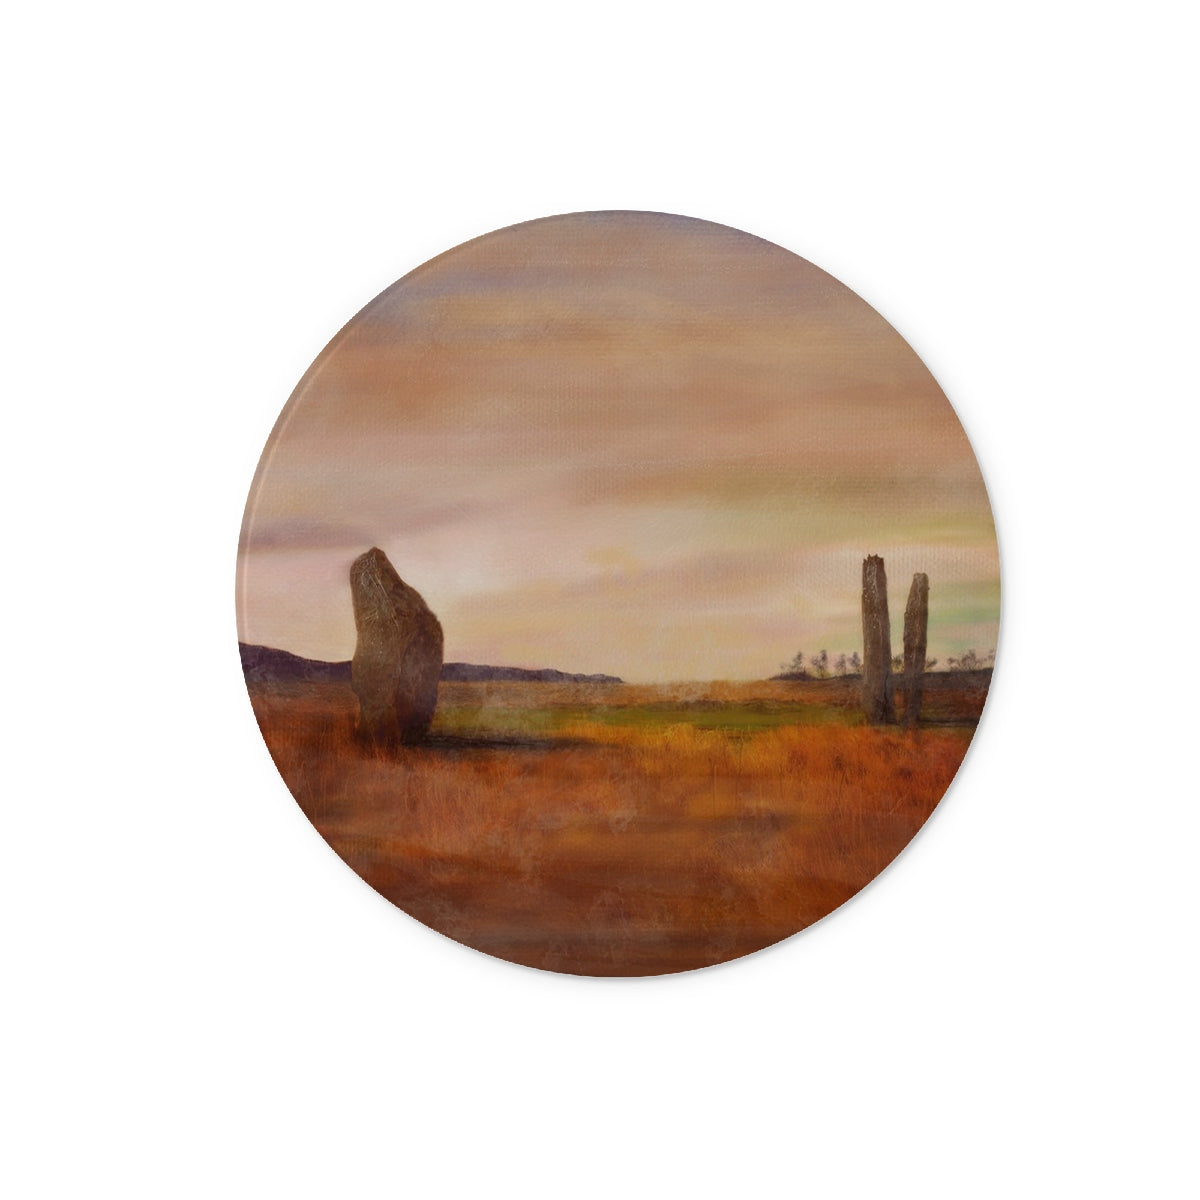 Machrie Moor Arran Art Gifts Glass Chopping Board-Glass Chopping Boards-Arran Art Gallery-12" Round-Paintings, Prints, Homeware, Art Gifts From Scotland By Scottish Artist Kevin Hunter